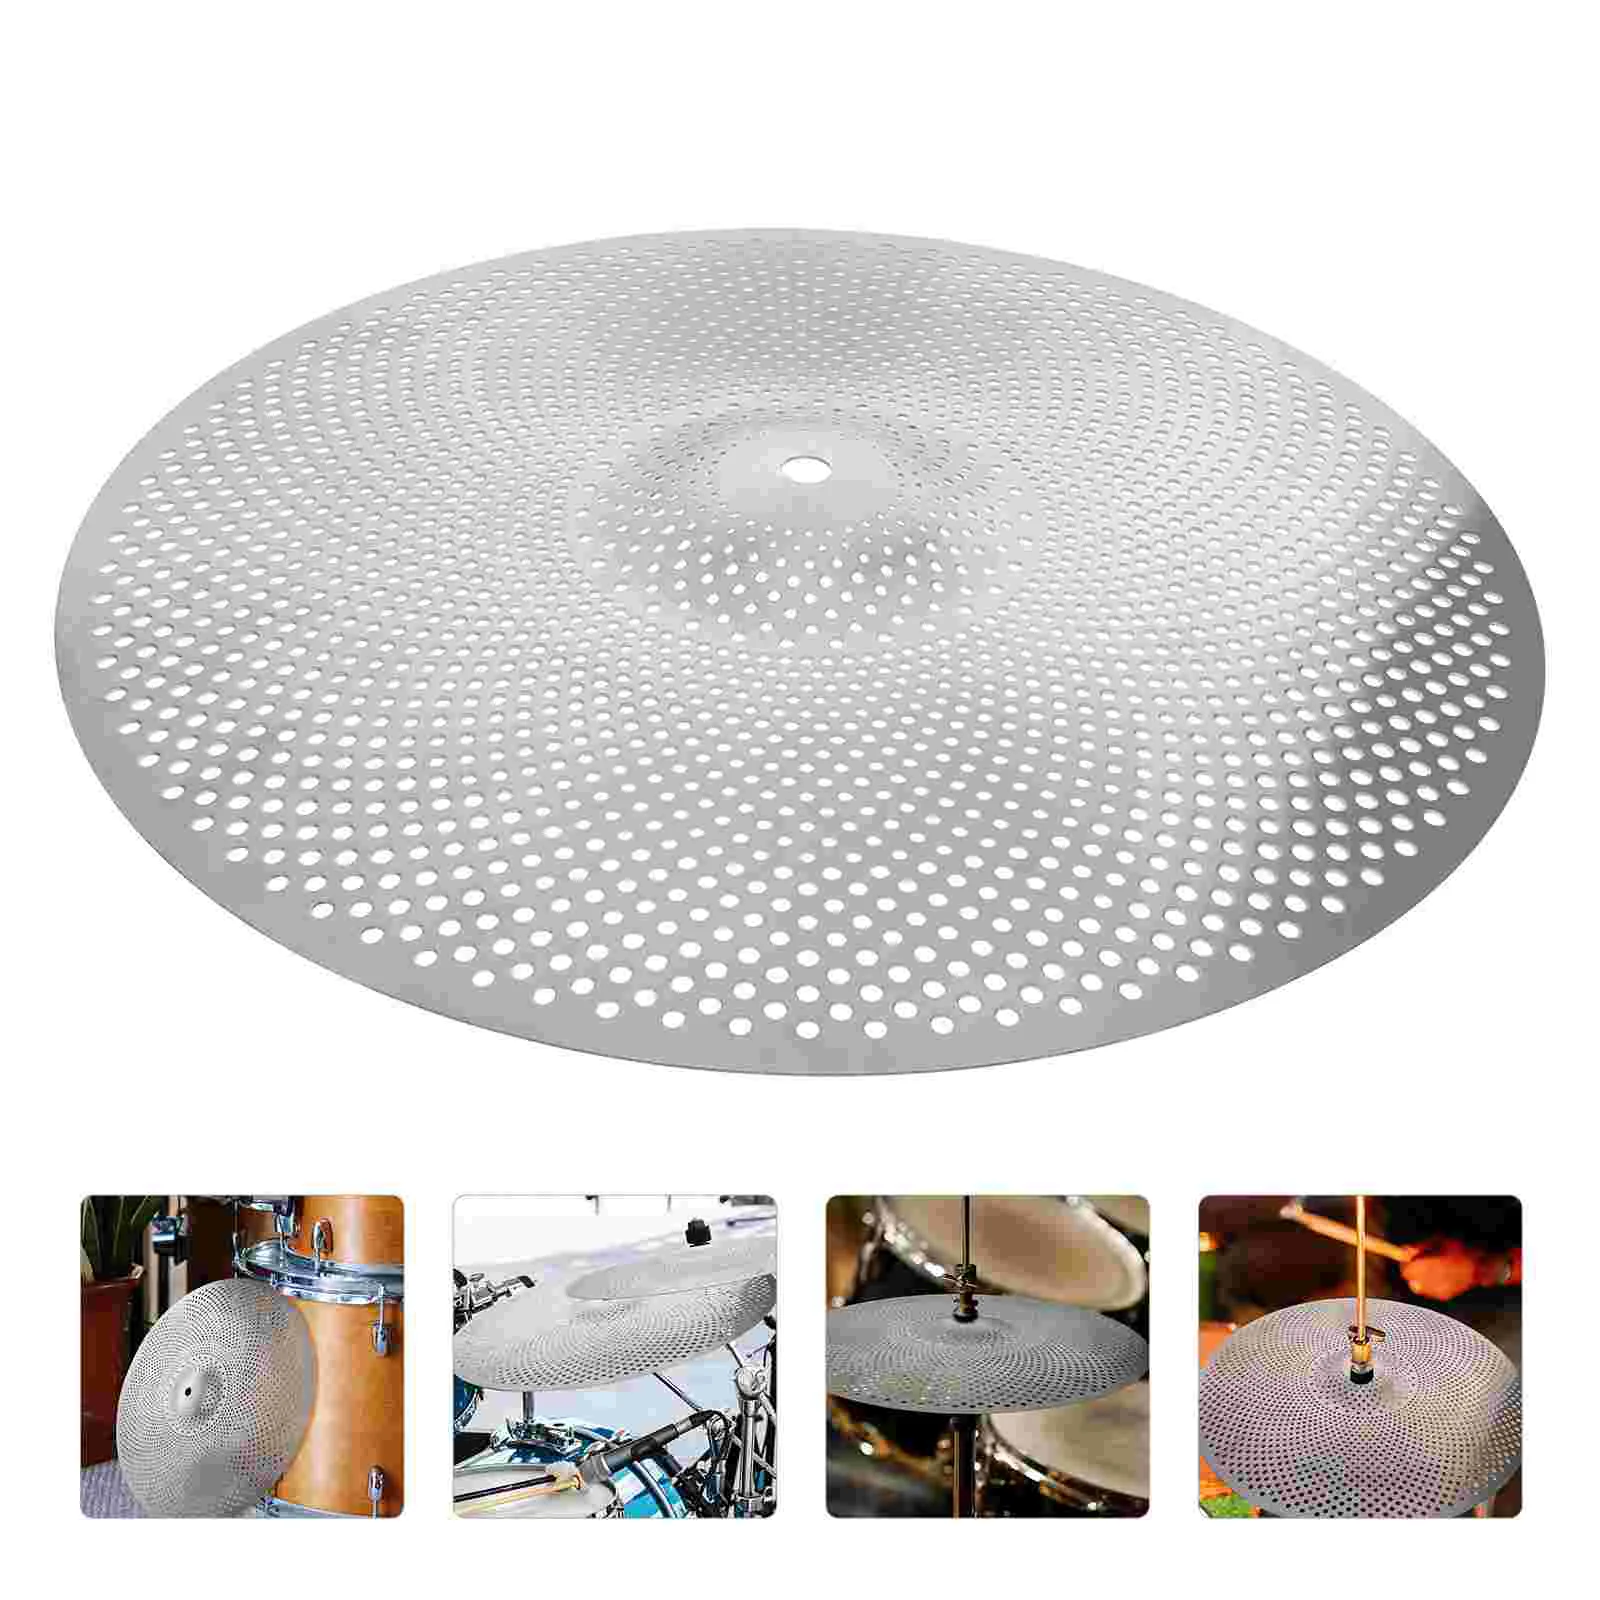 

Drum Percussion Ride Crash Cymbal Piecess Percussion Instrument Accessory Musical Part Bass Crash Jazz Mute Alloy Fitting